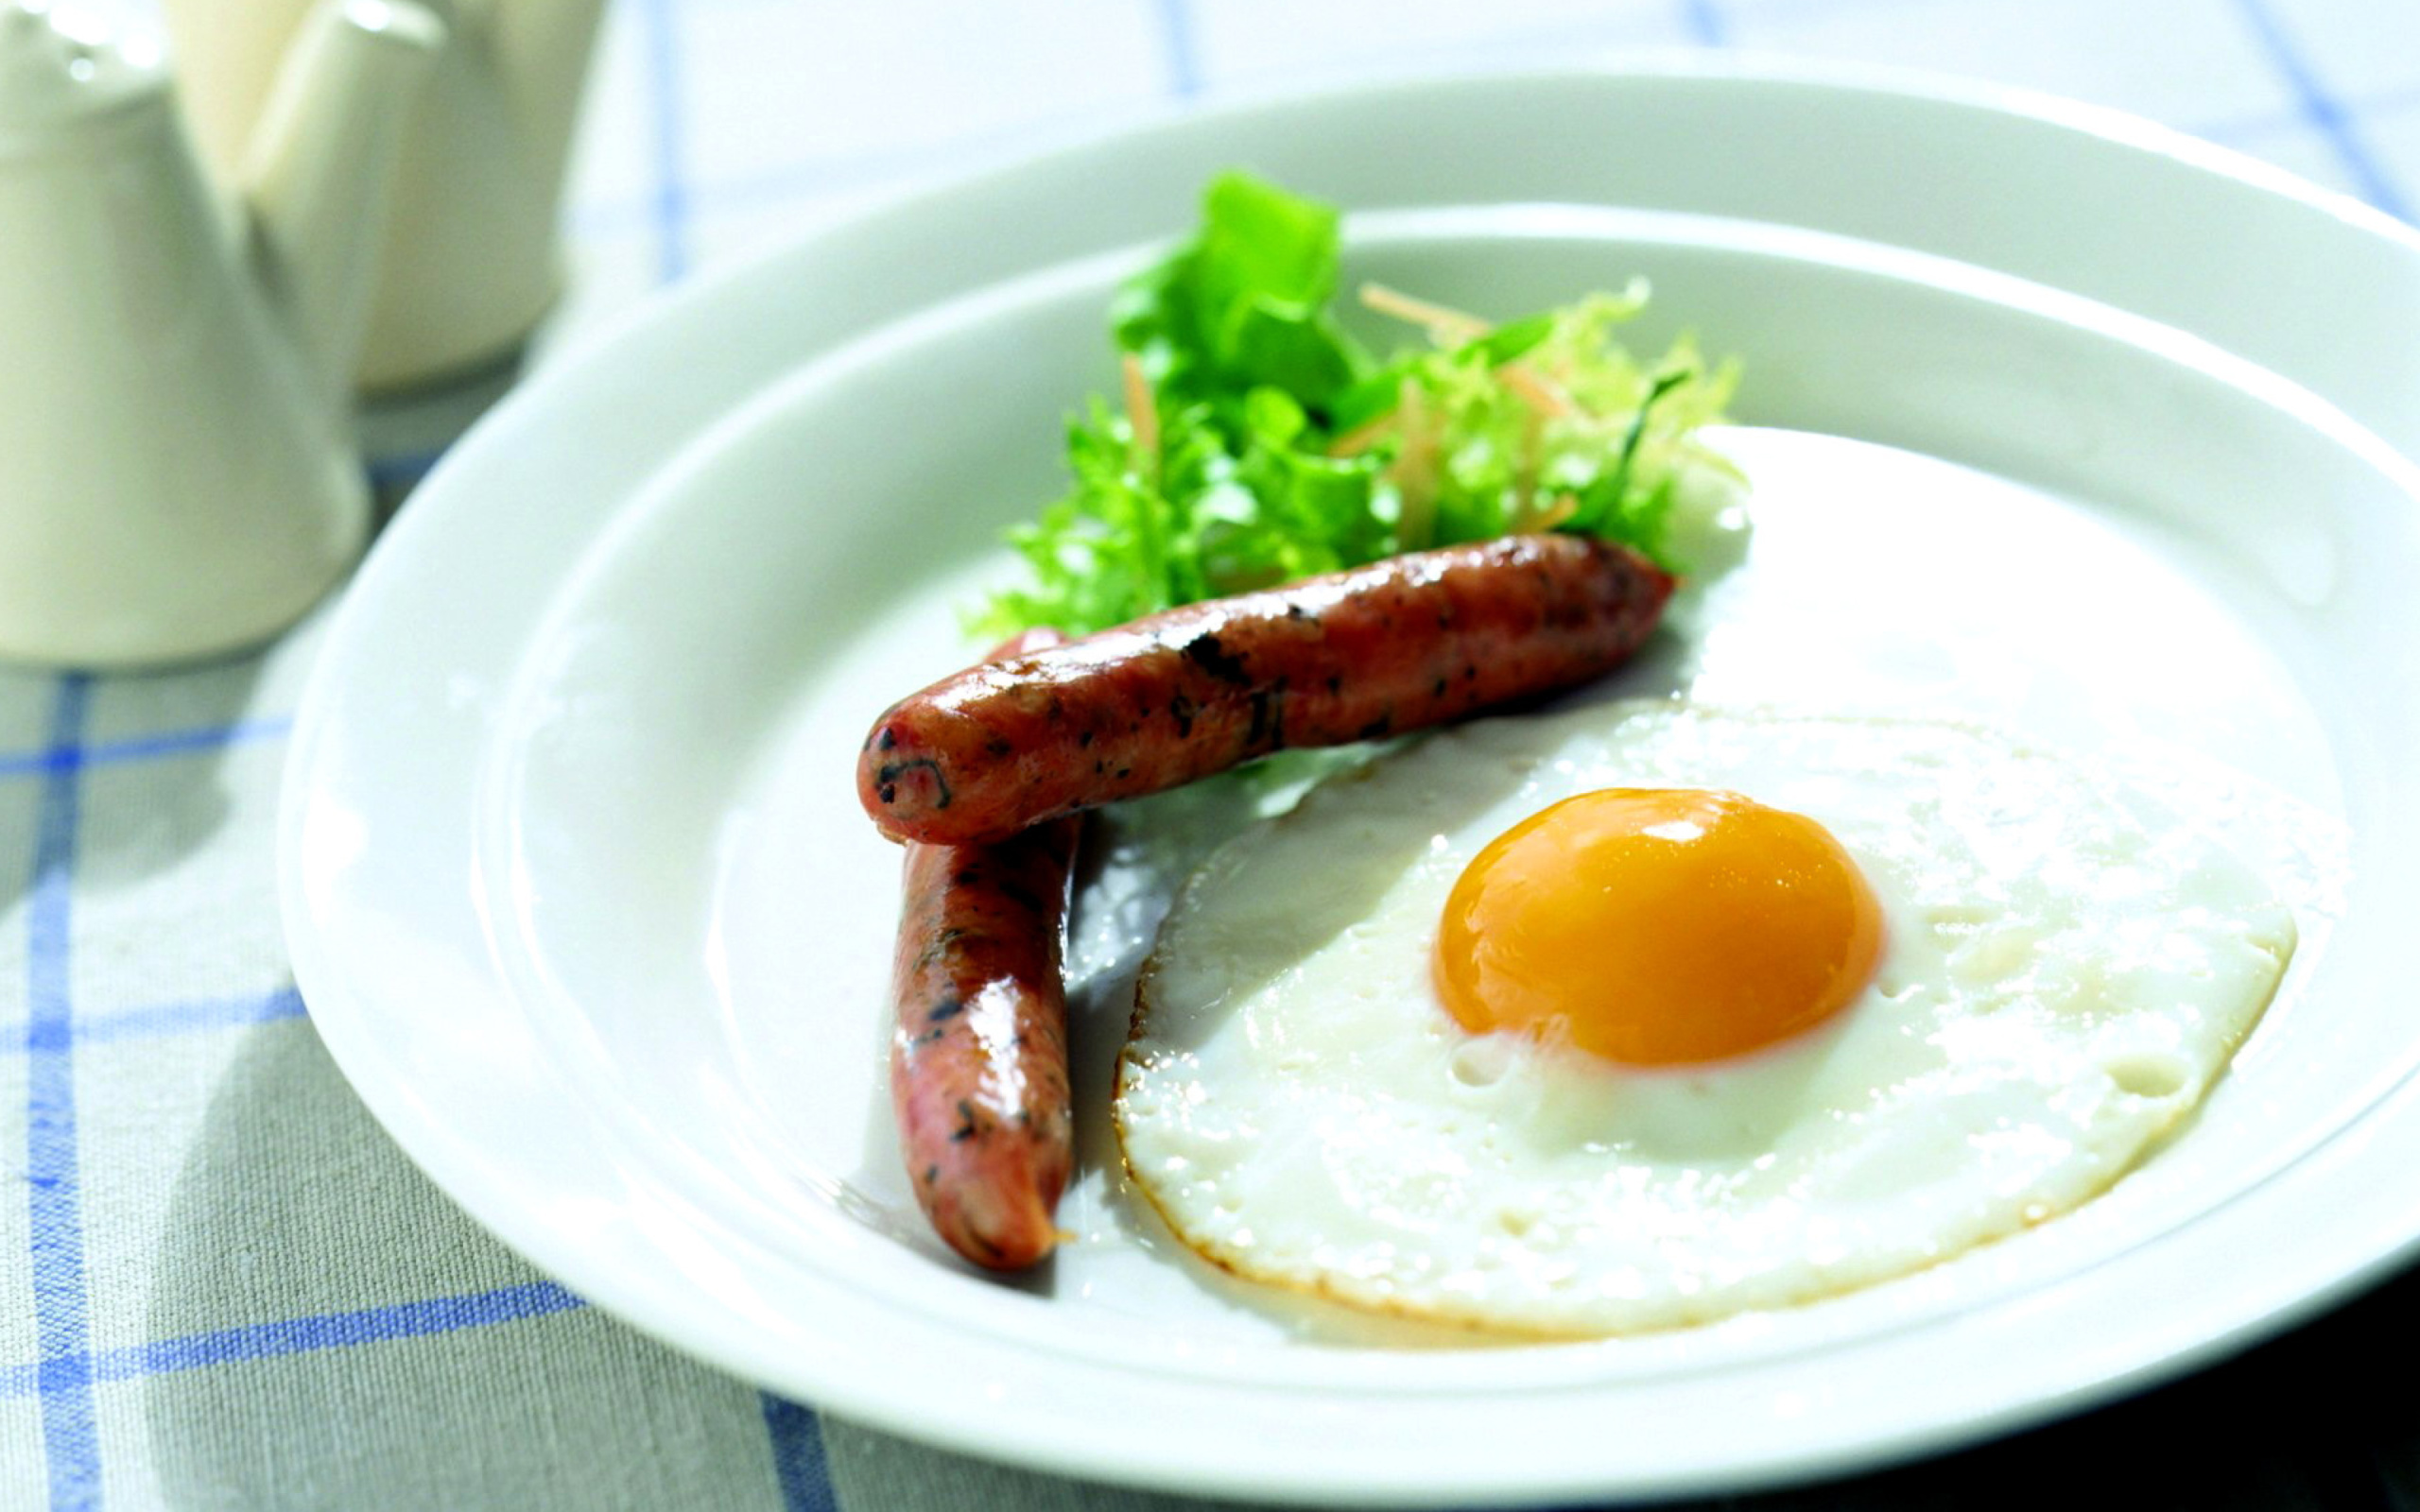 Breakfast with Sausage wallpaper 2560x1600